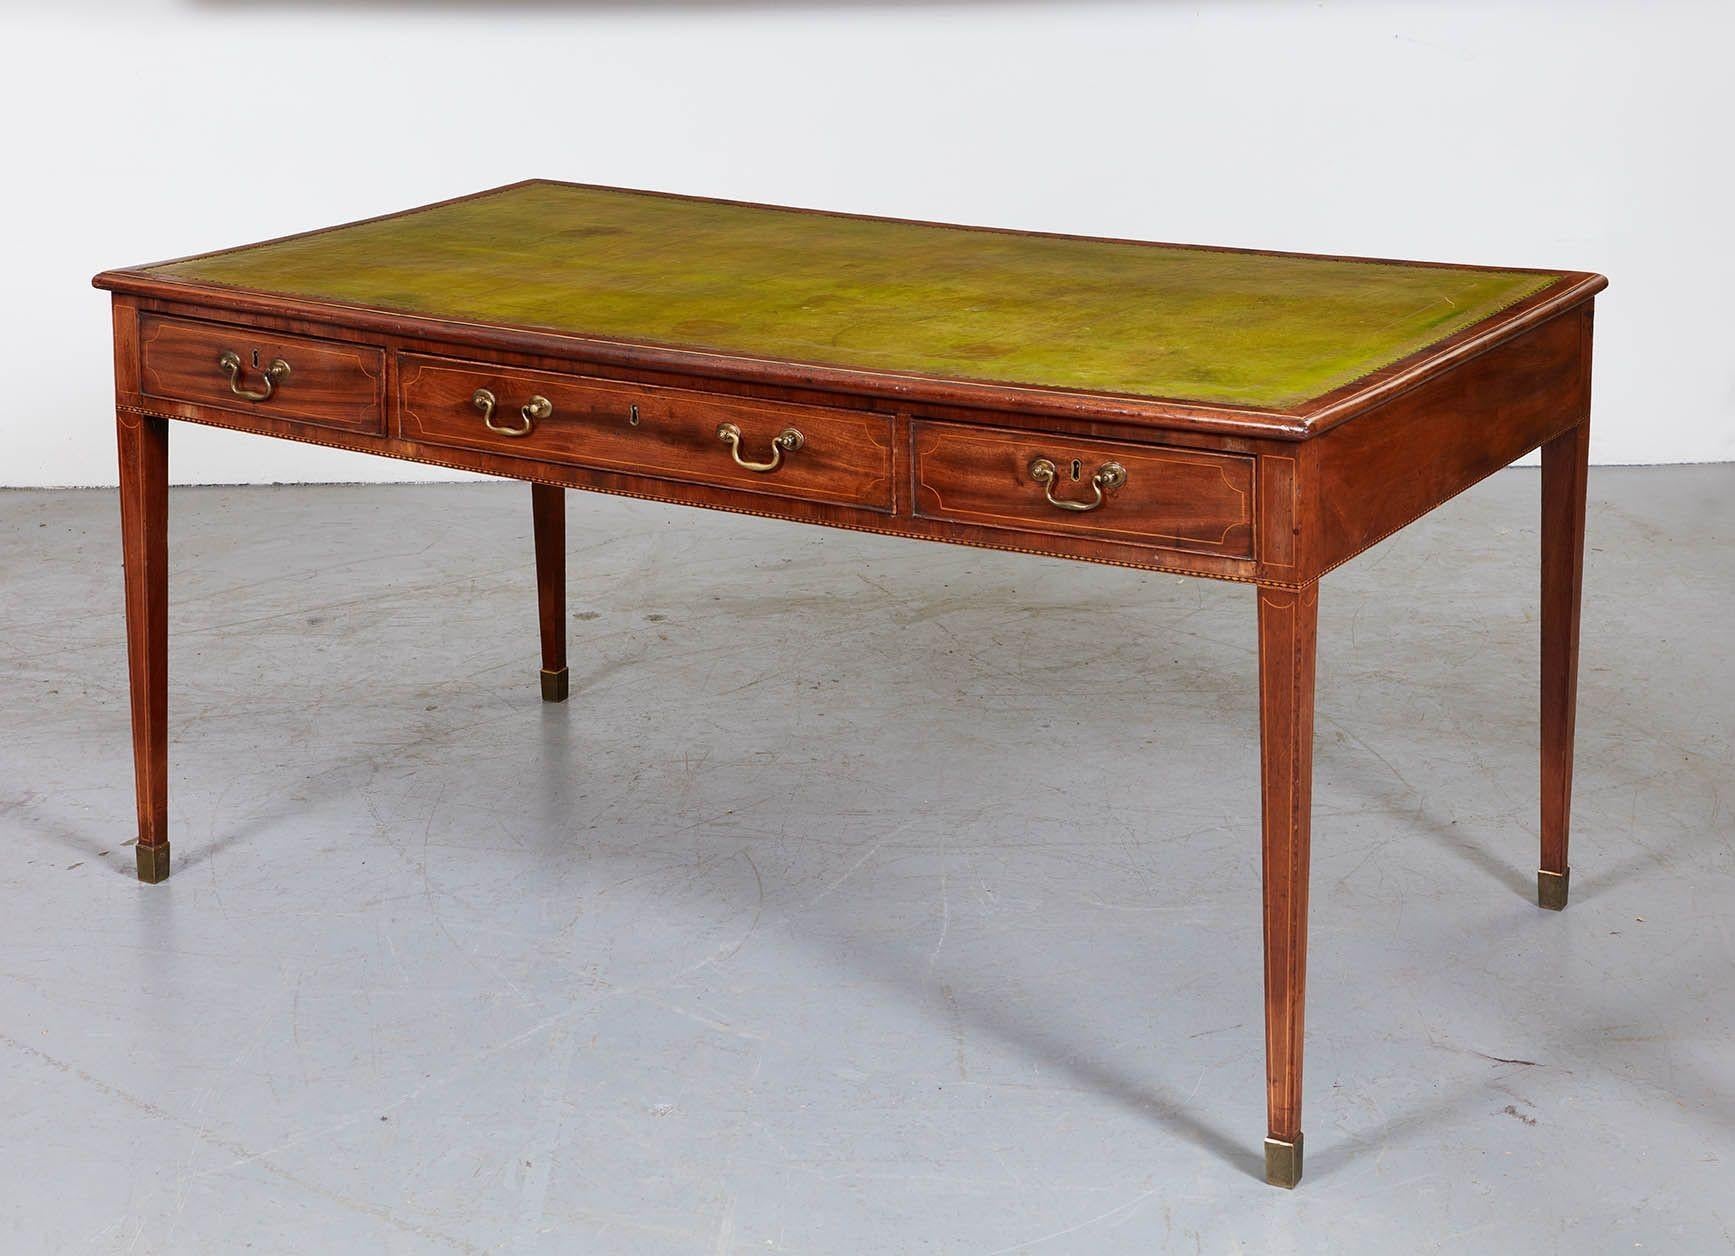 English late 18th century/early 19th century mahogany writing table with hand-tooled leather top on three drawers standing on tapered legs ending in brass capped feet, with fine string inlay to apron, drawers and feet. Wonderfully grained mahogany,